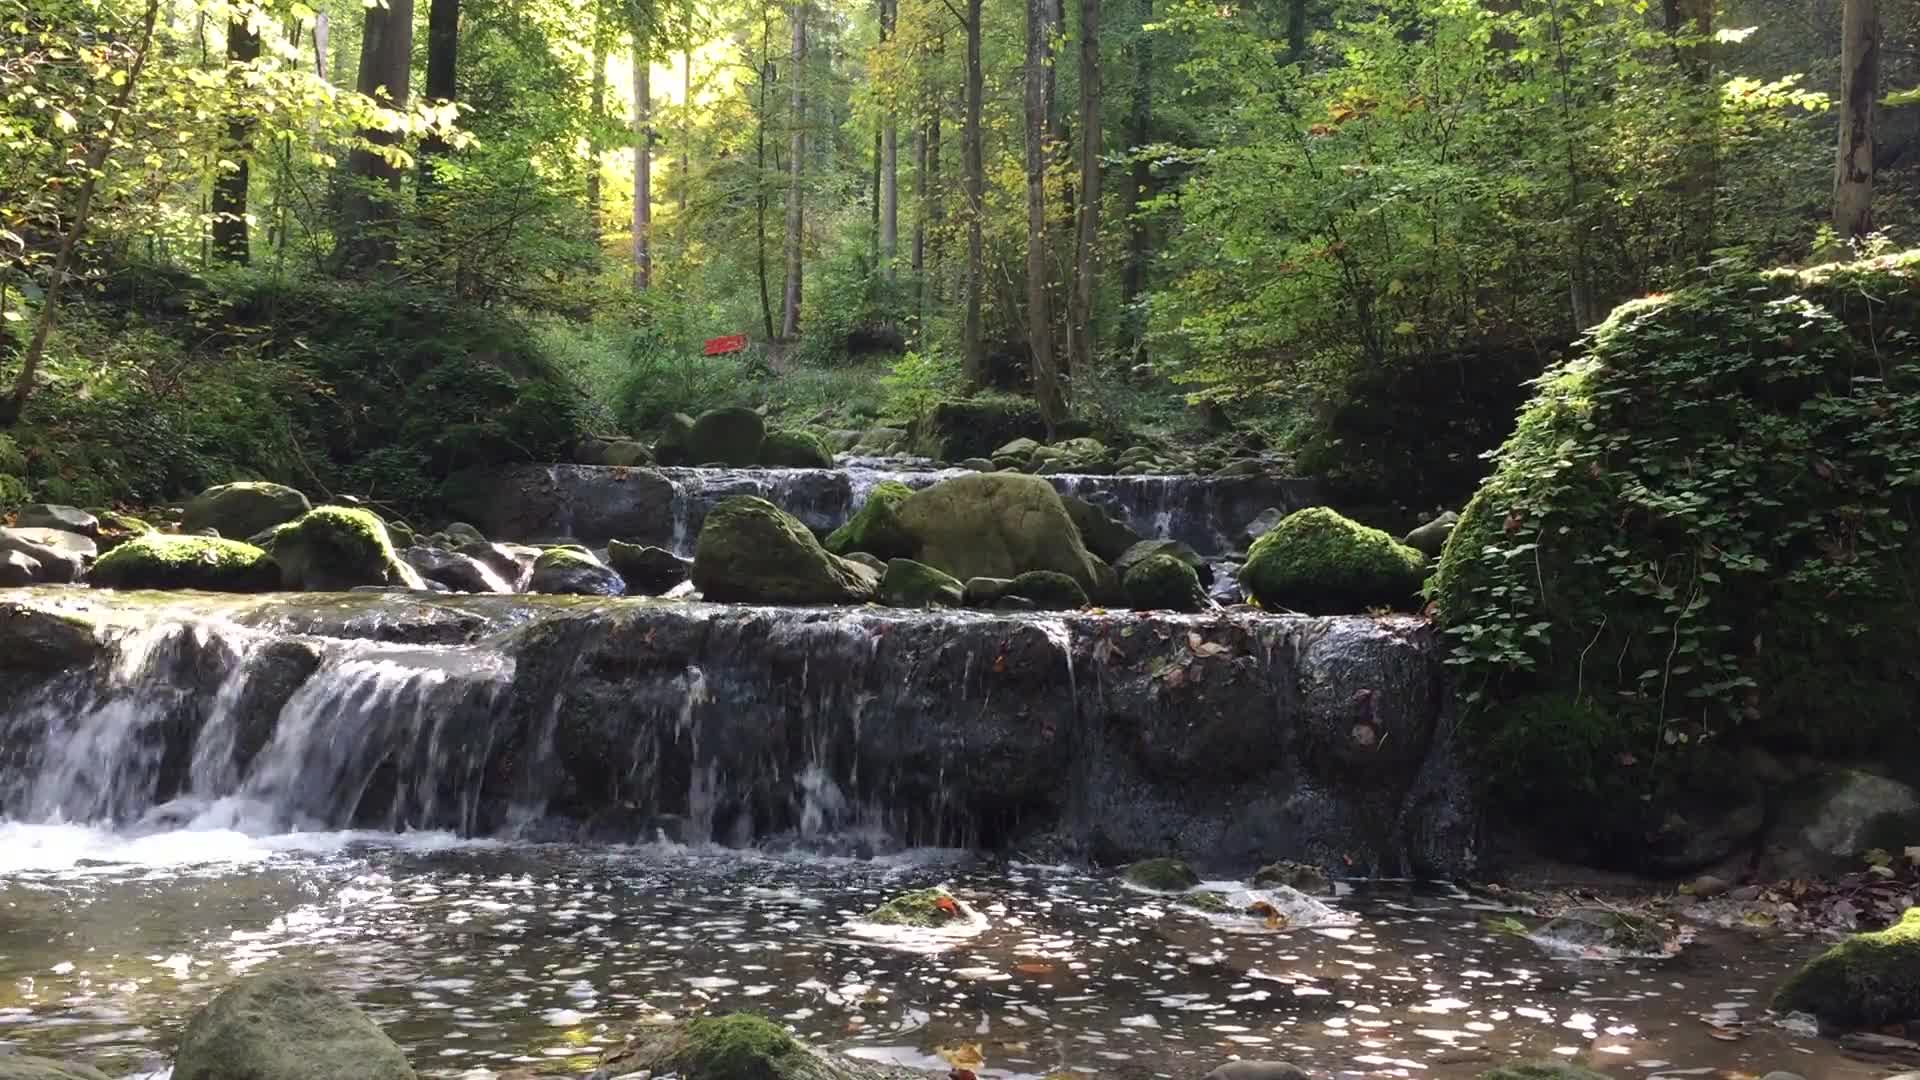 A Relaxing View And Sound Of The Waterfall